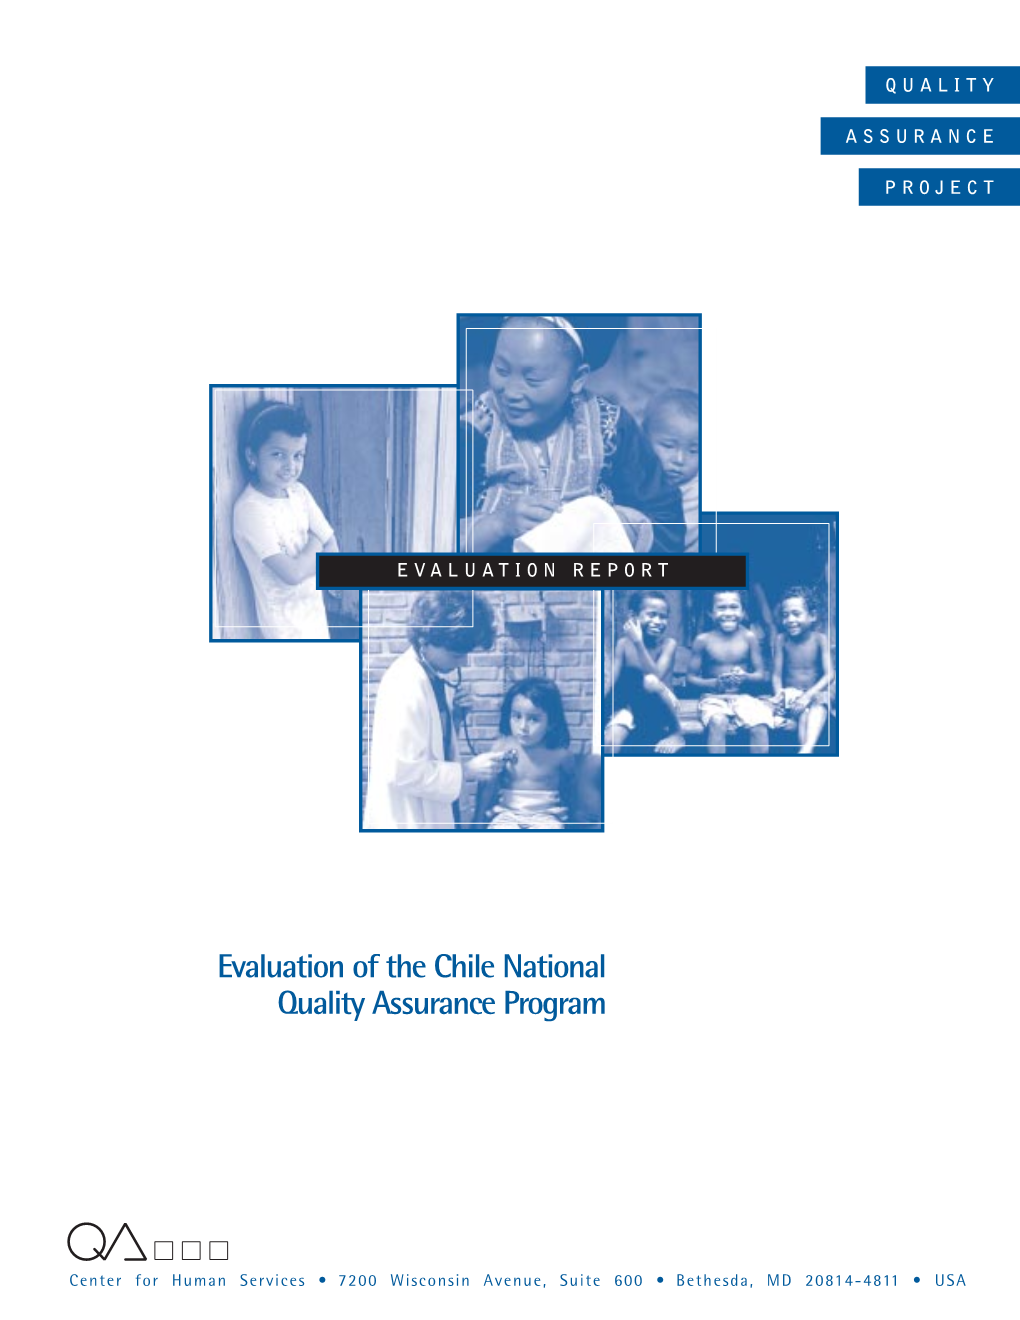 Evaluation of the Chile National Quality Assurance Program